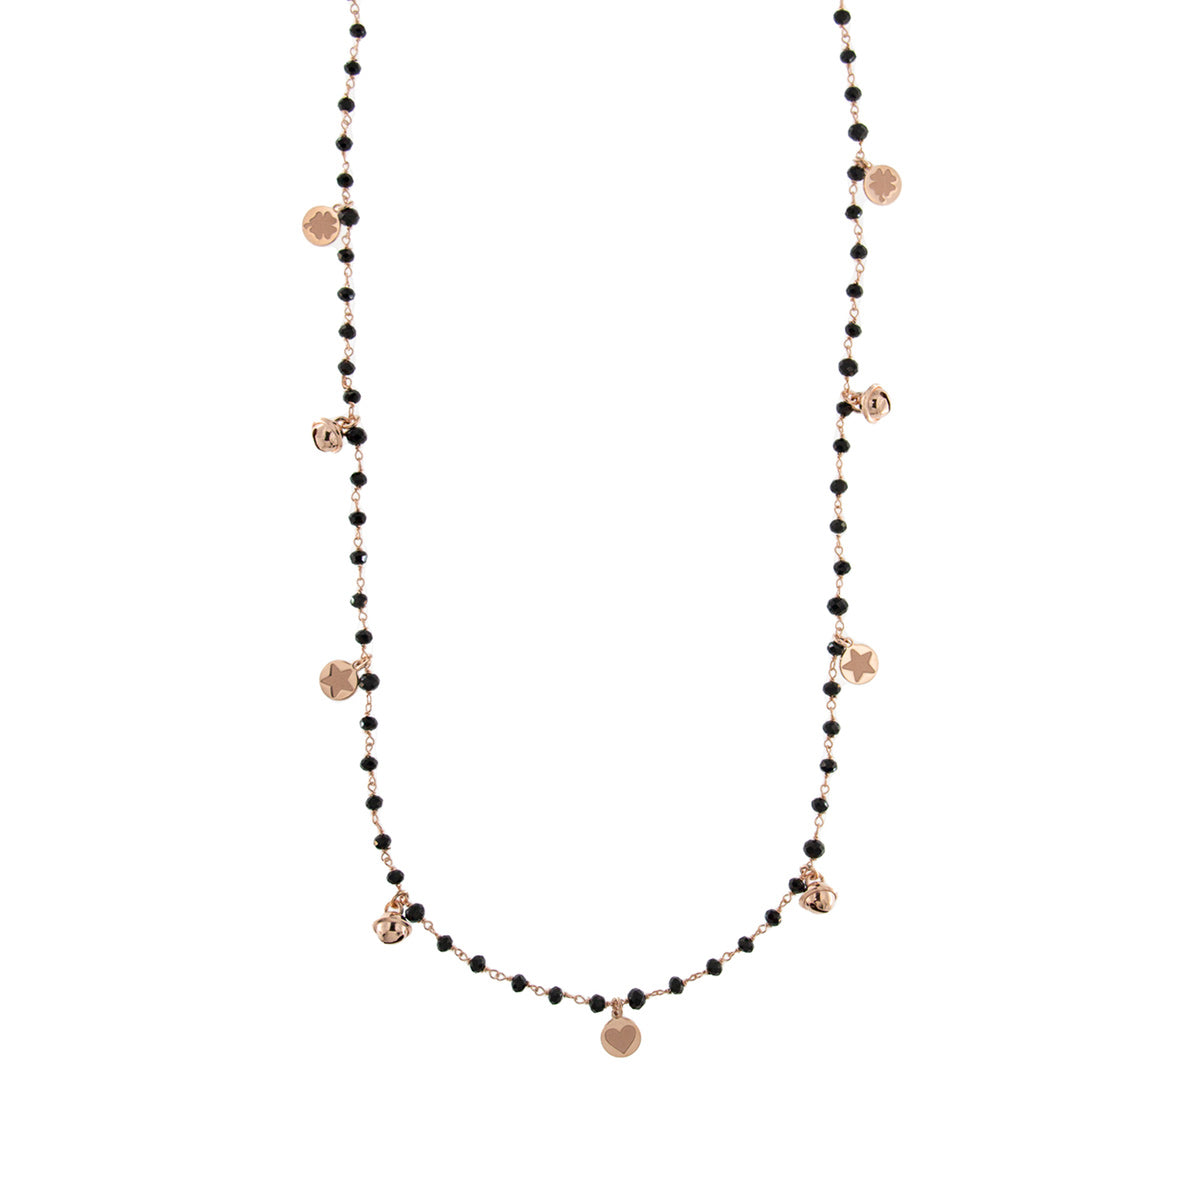 CHAINED LONG NECKLACE - GIPSY TIERRA BLACK